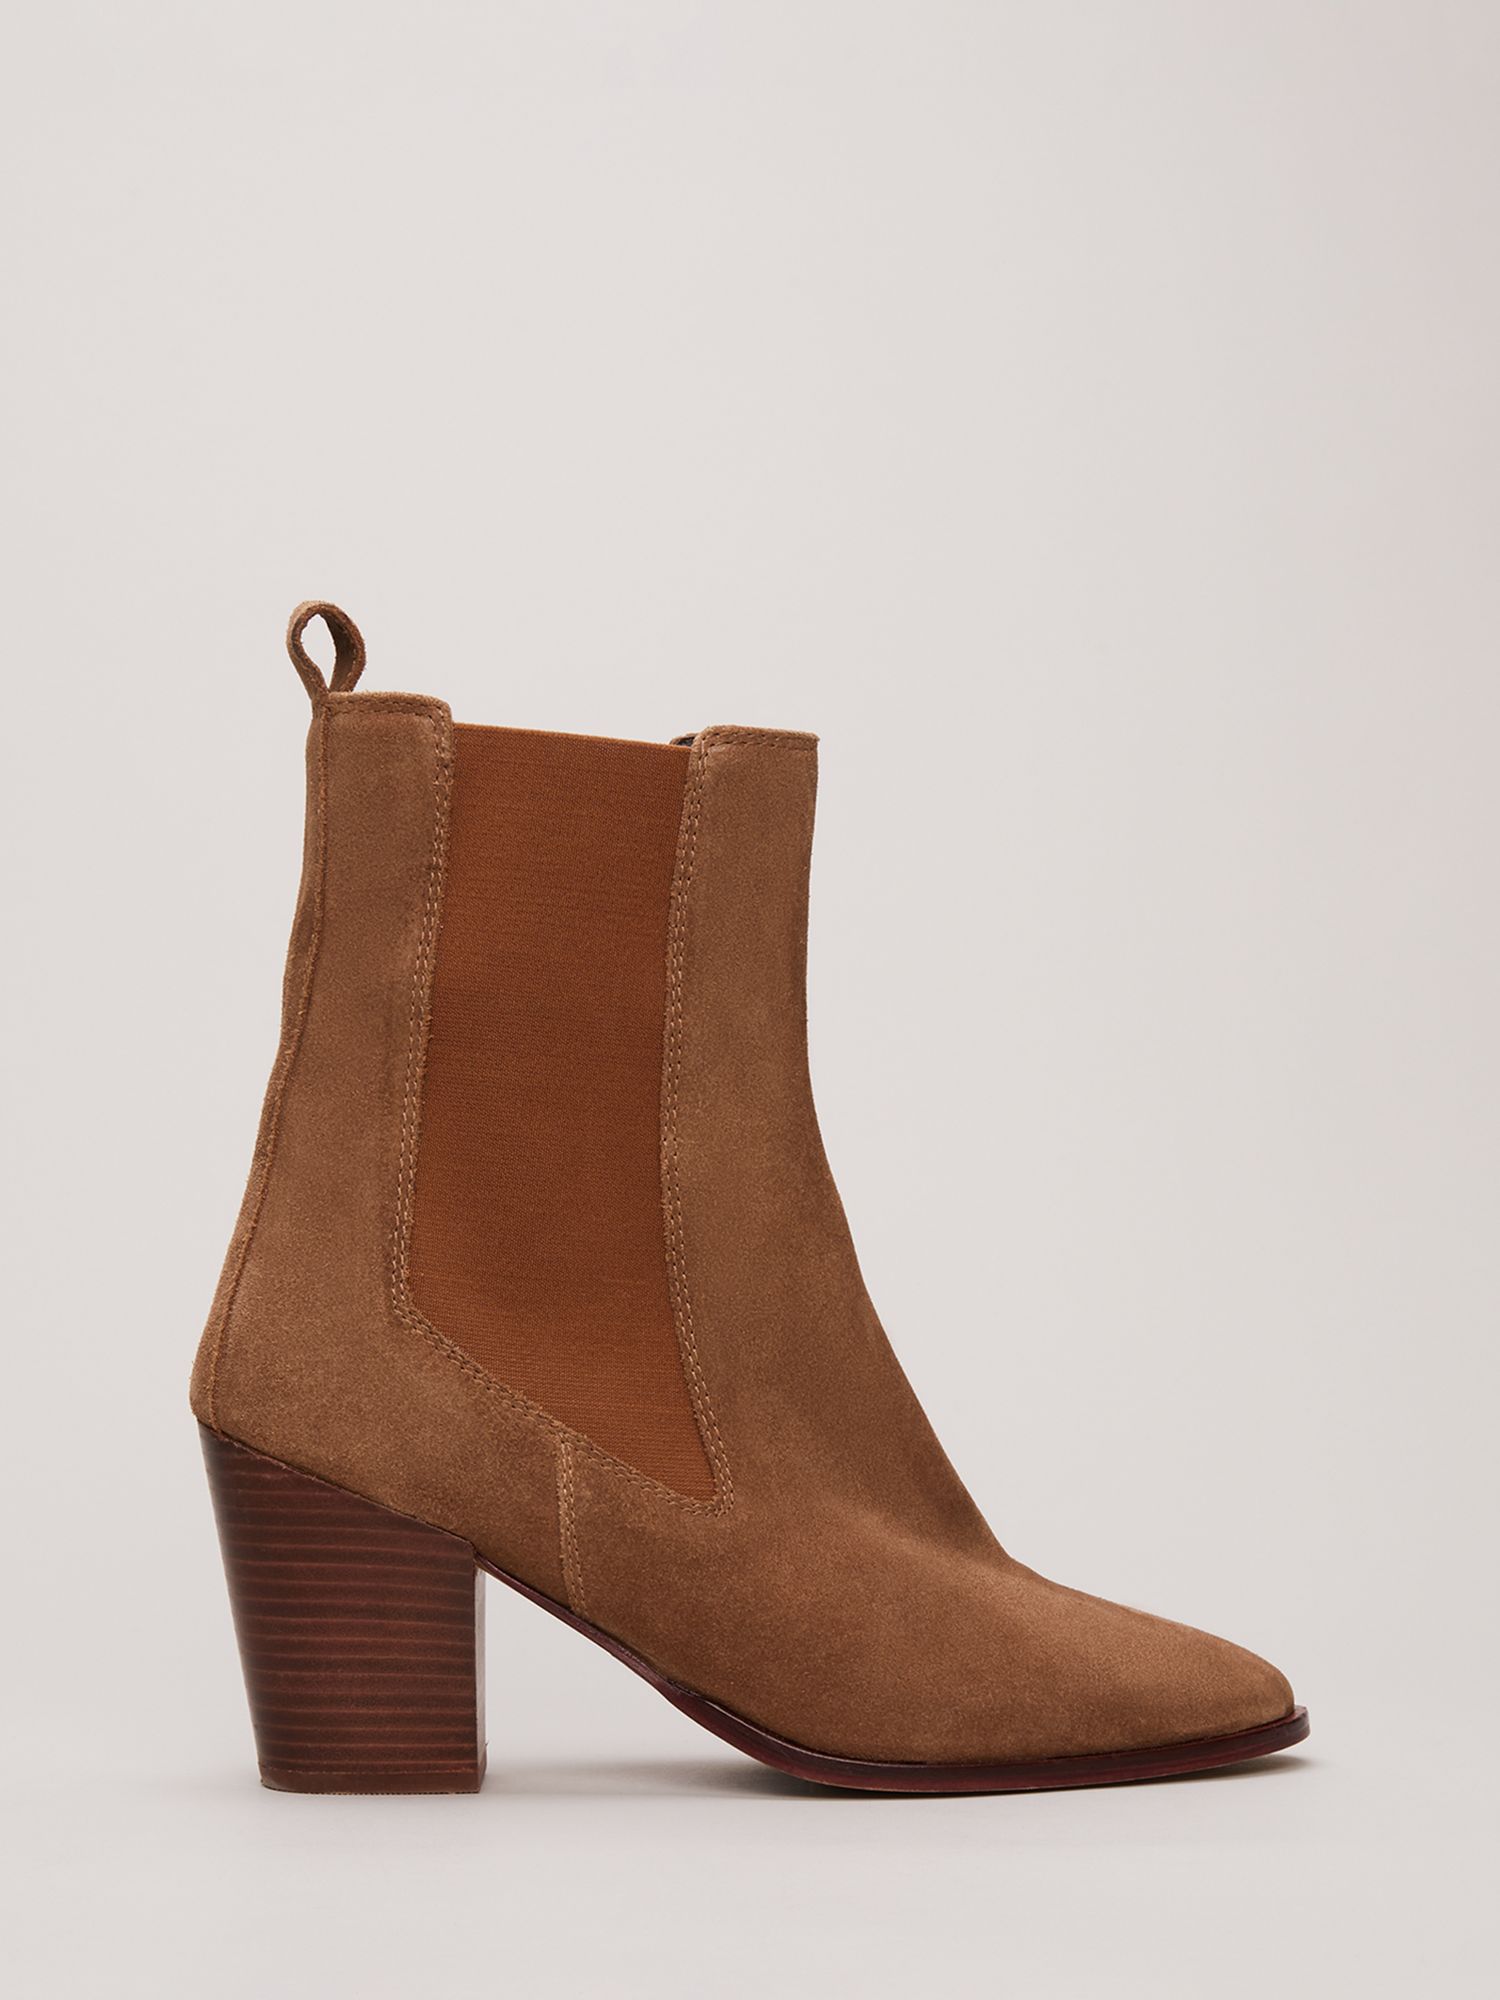 Phase Eight Suede Cowboy Boots, Tan, EU40